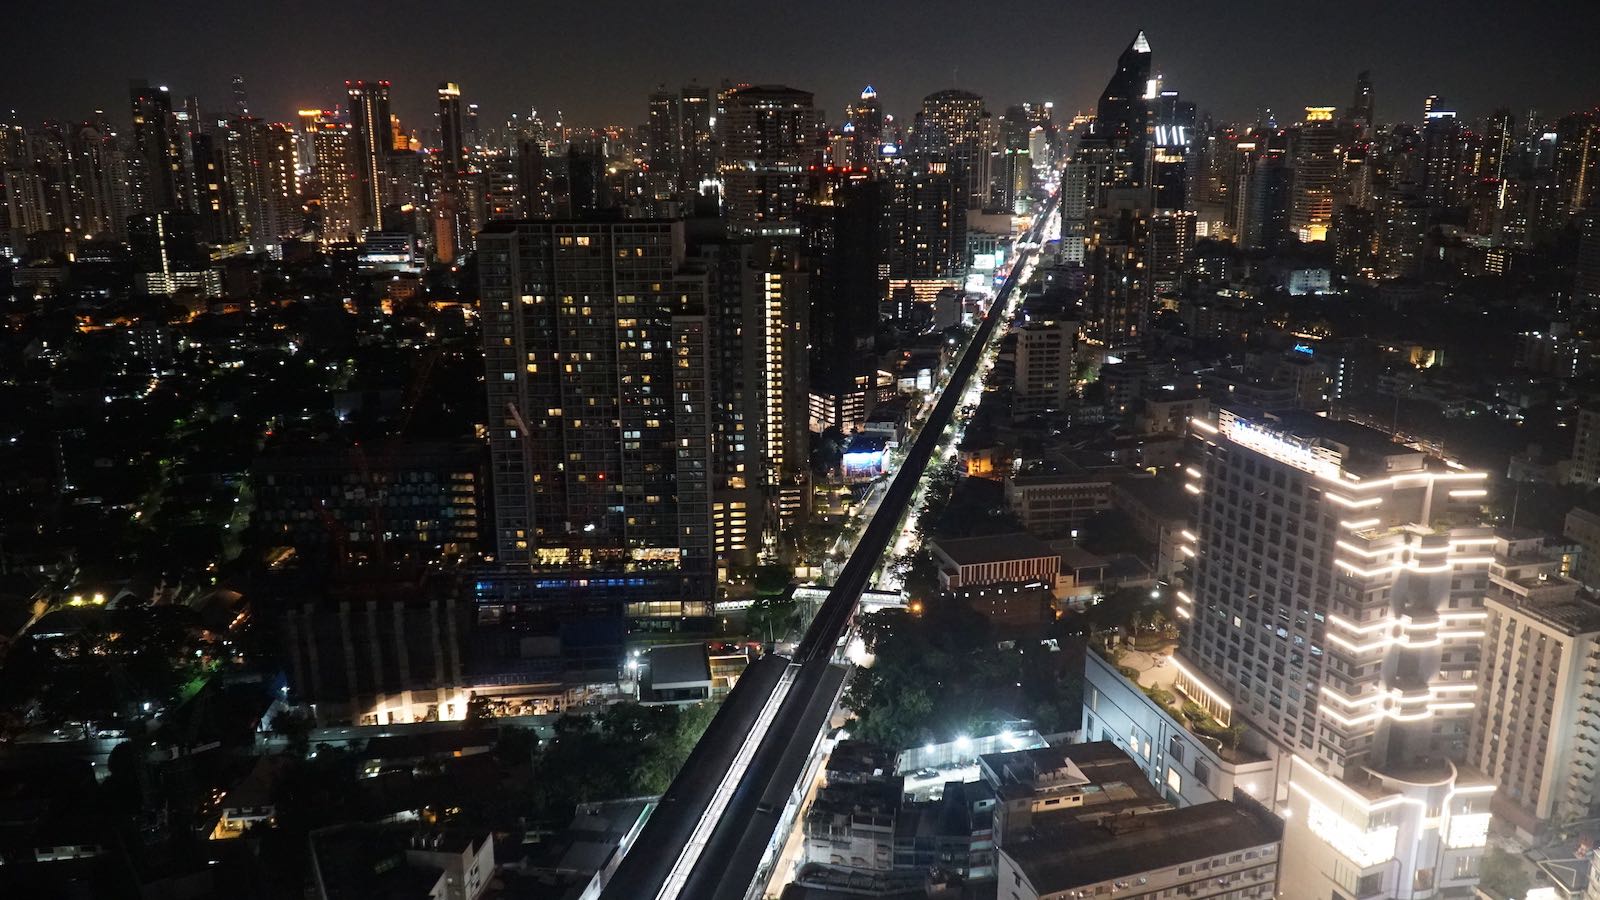 One night I decided to try and get a birds eye of the view of the city of Bangkok at night and found a rooftop bar in my area.